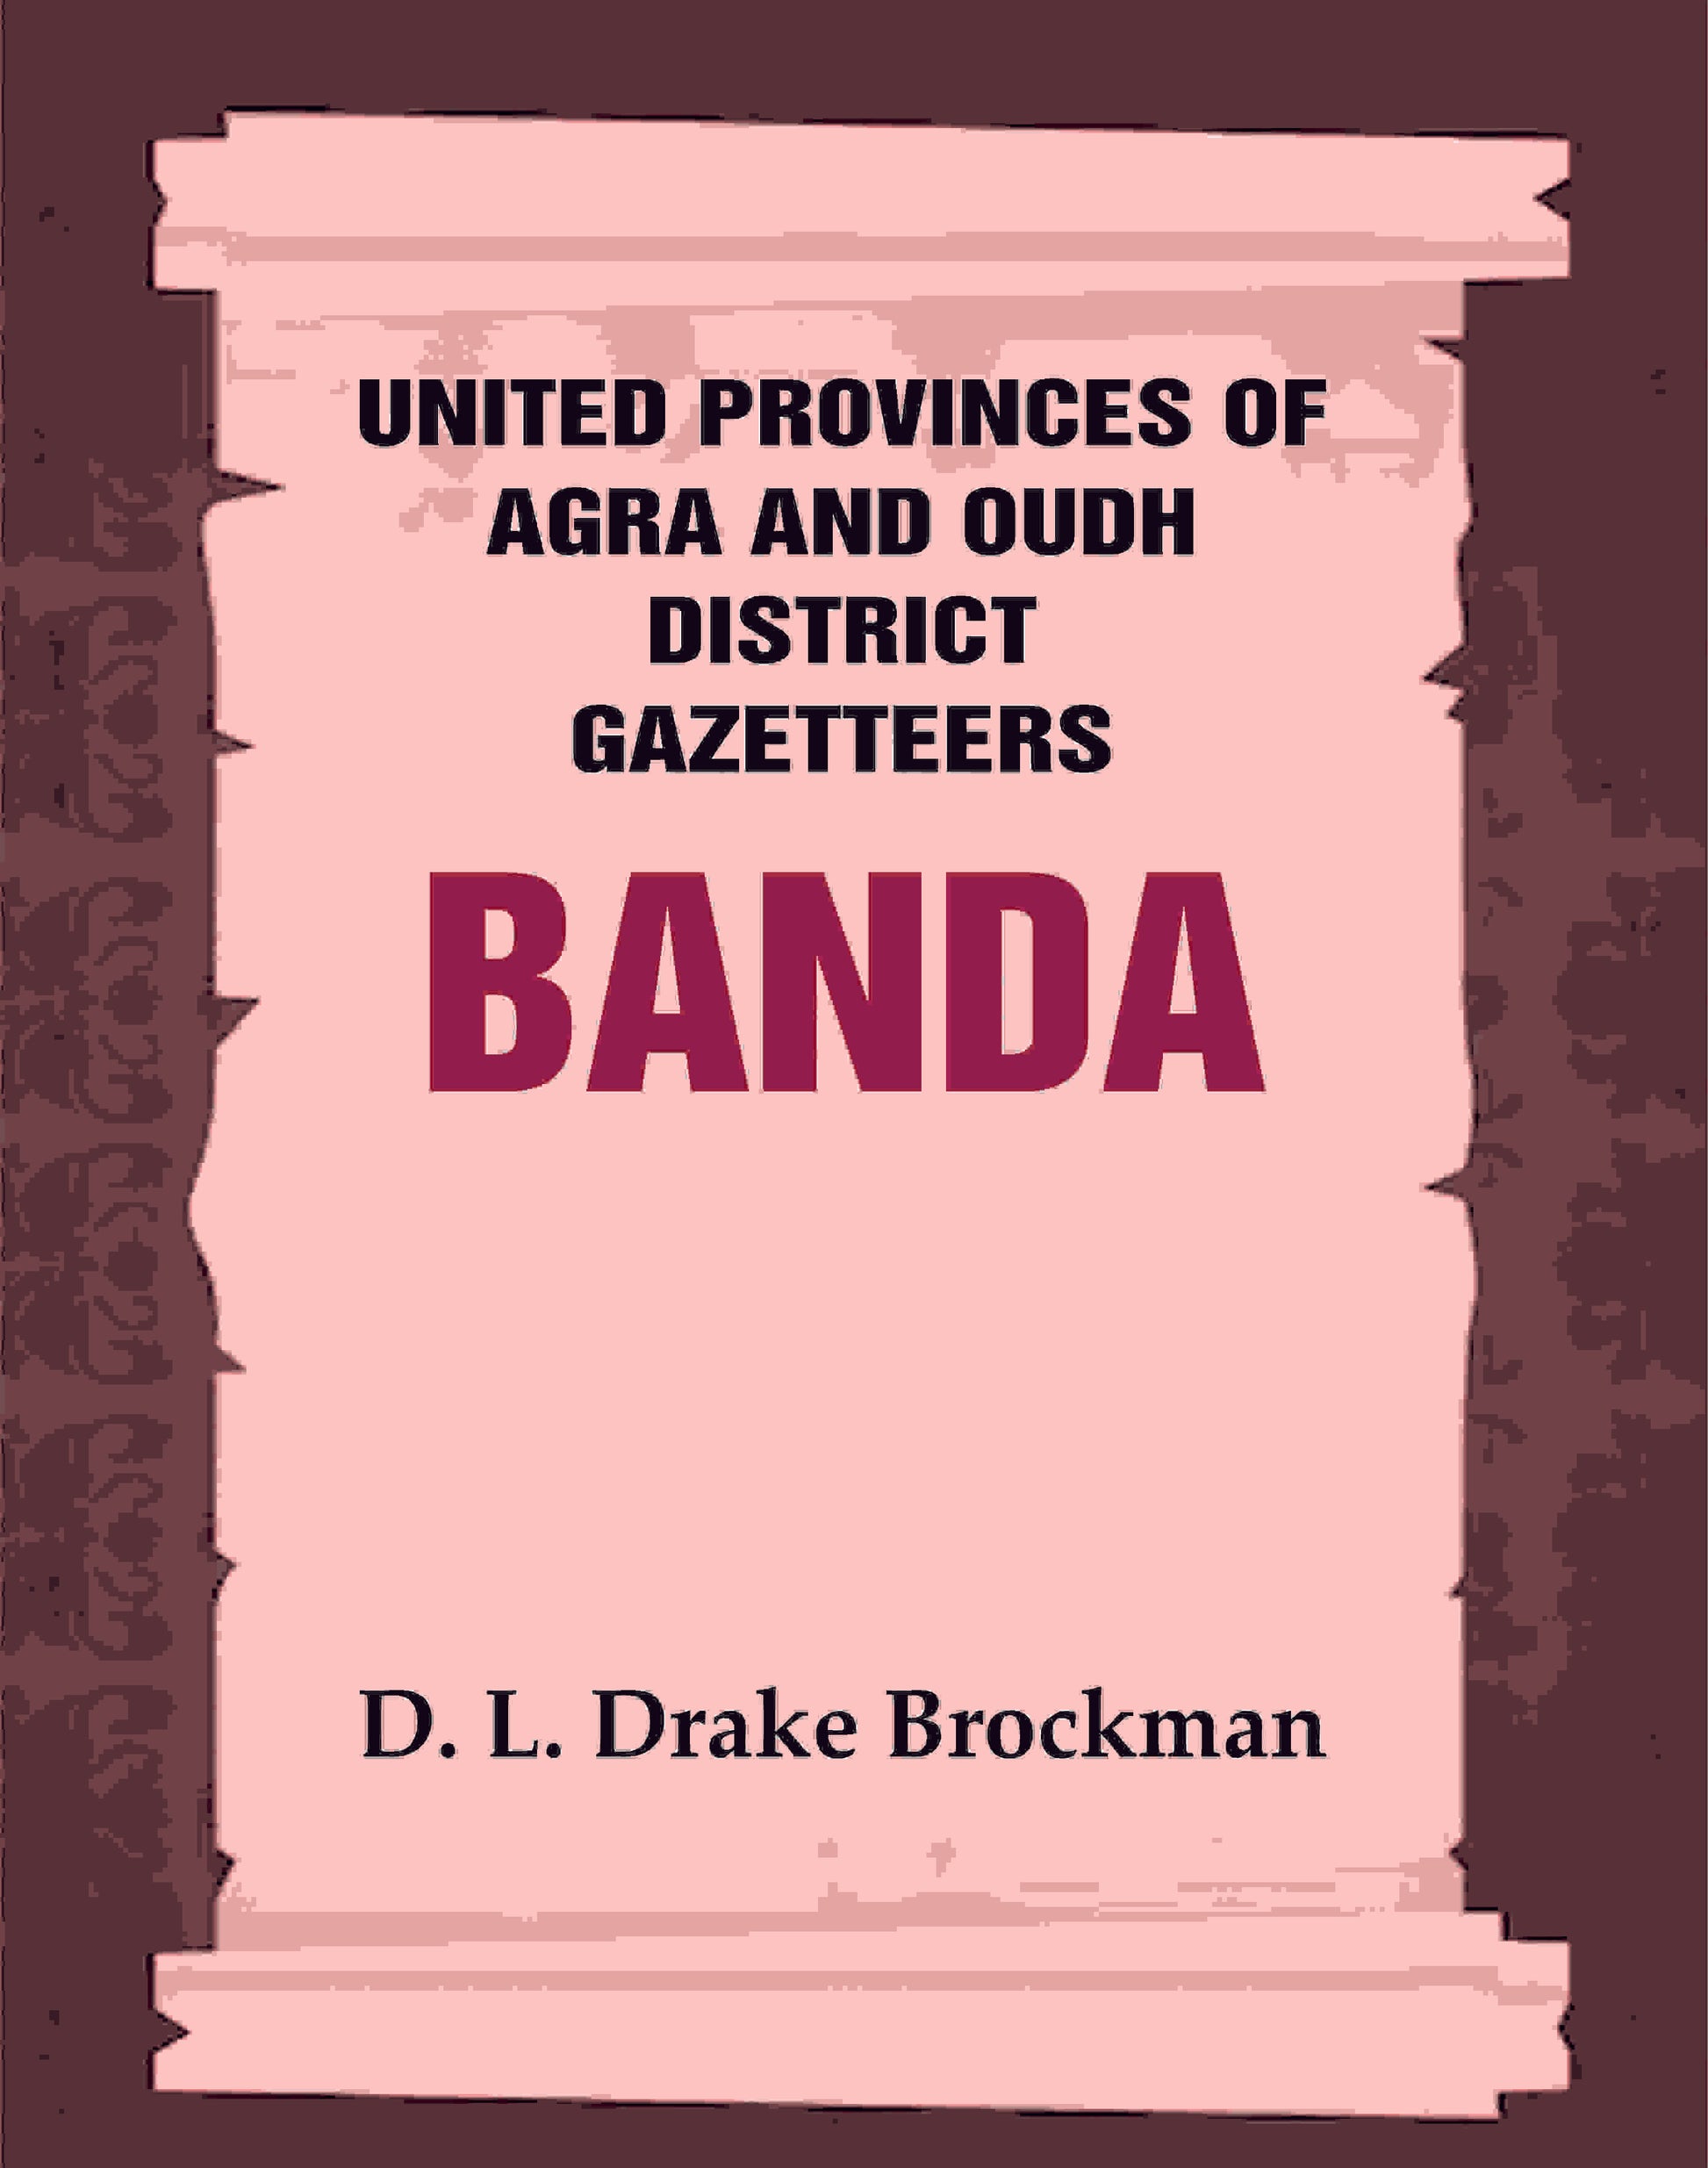 United Provinces of Agra and Oudh District Gazetteers: Banda